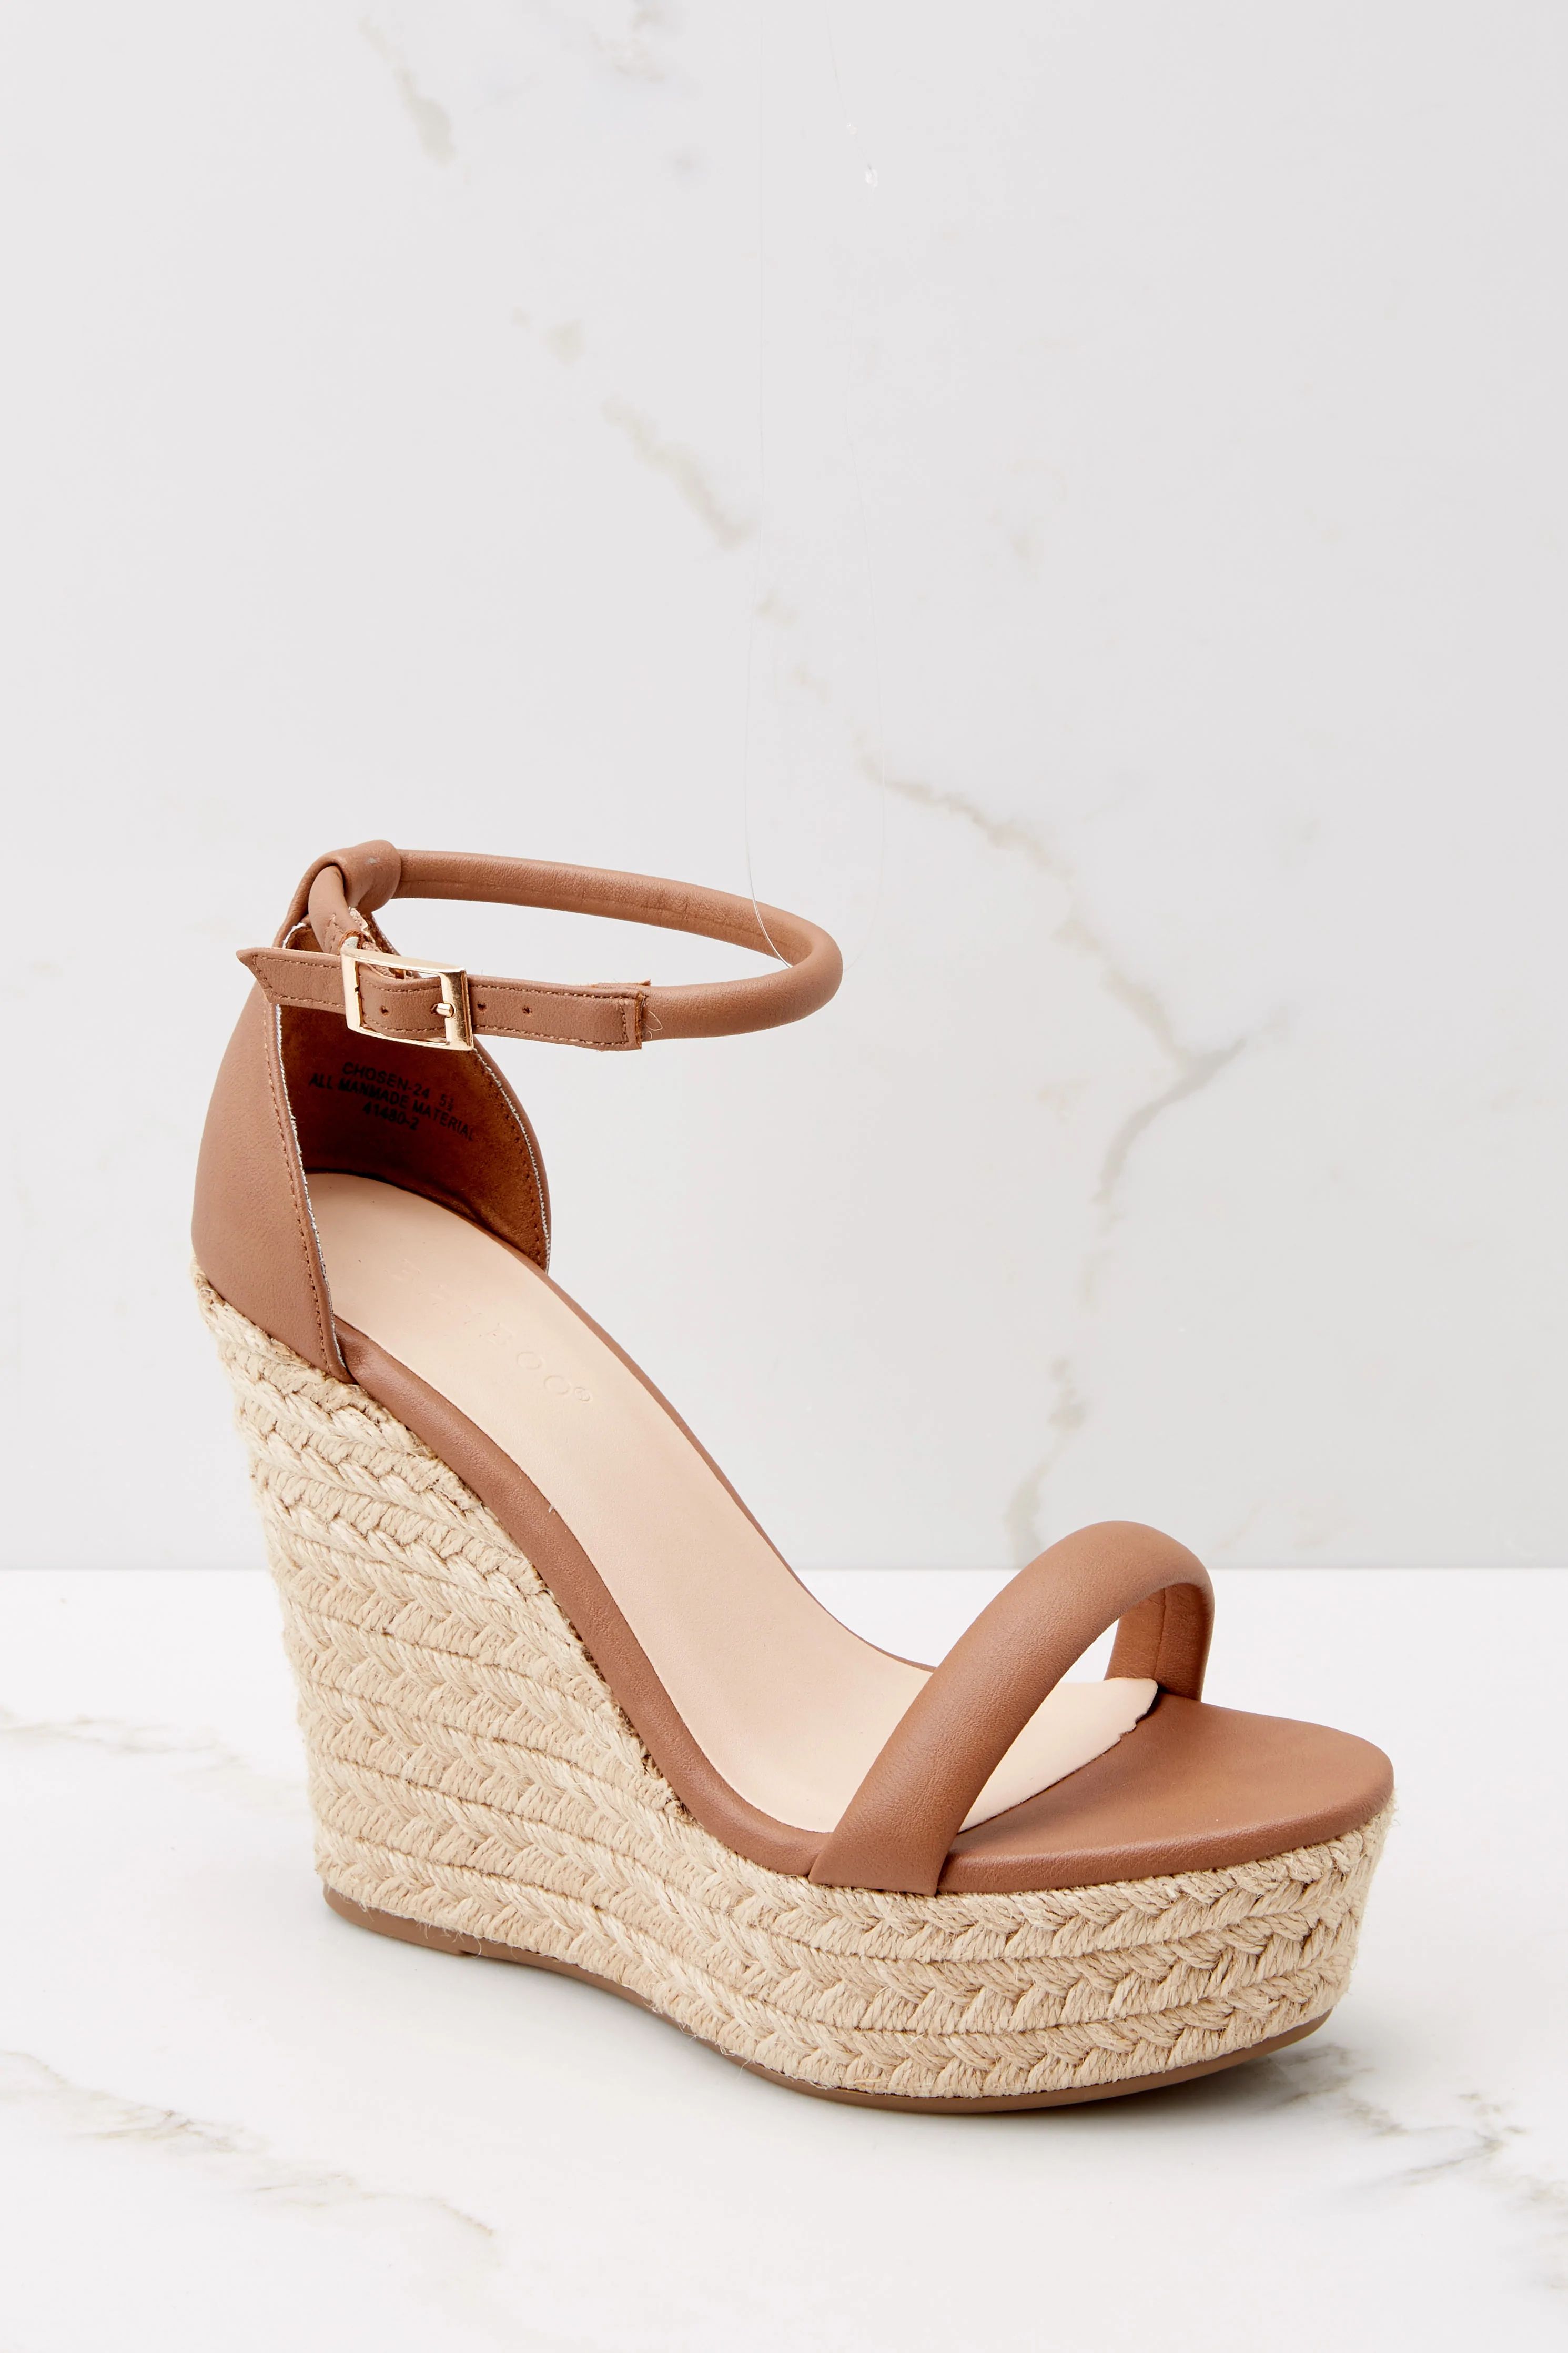 Evening Essential Tan Wedge Sandals | Red Dress 